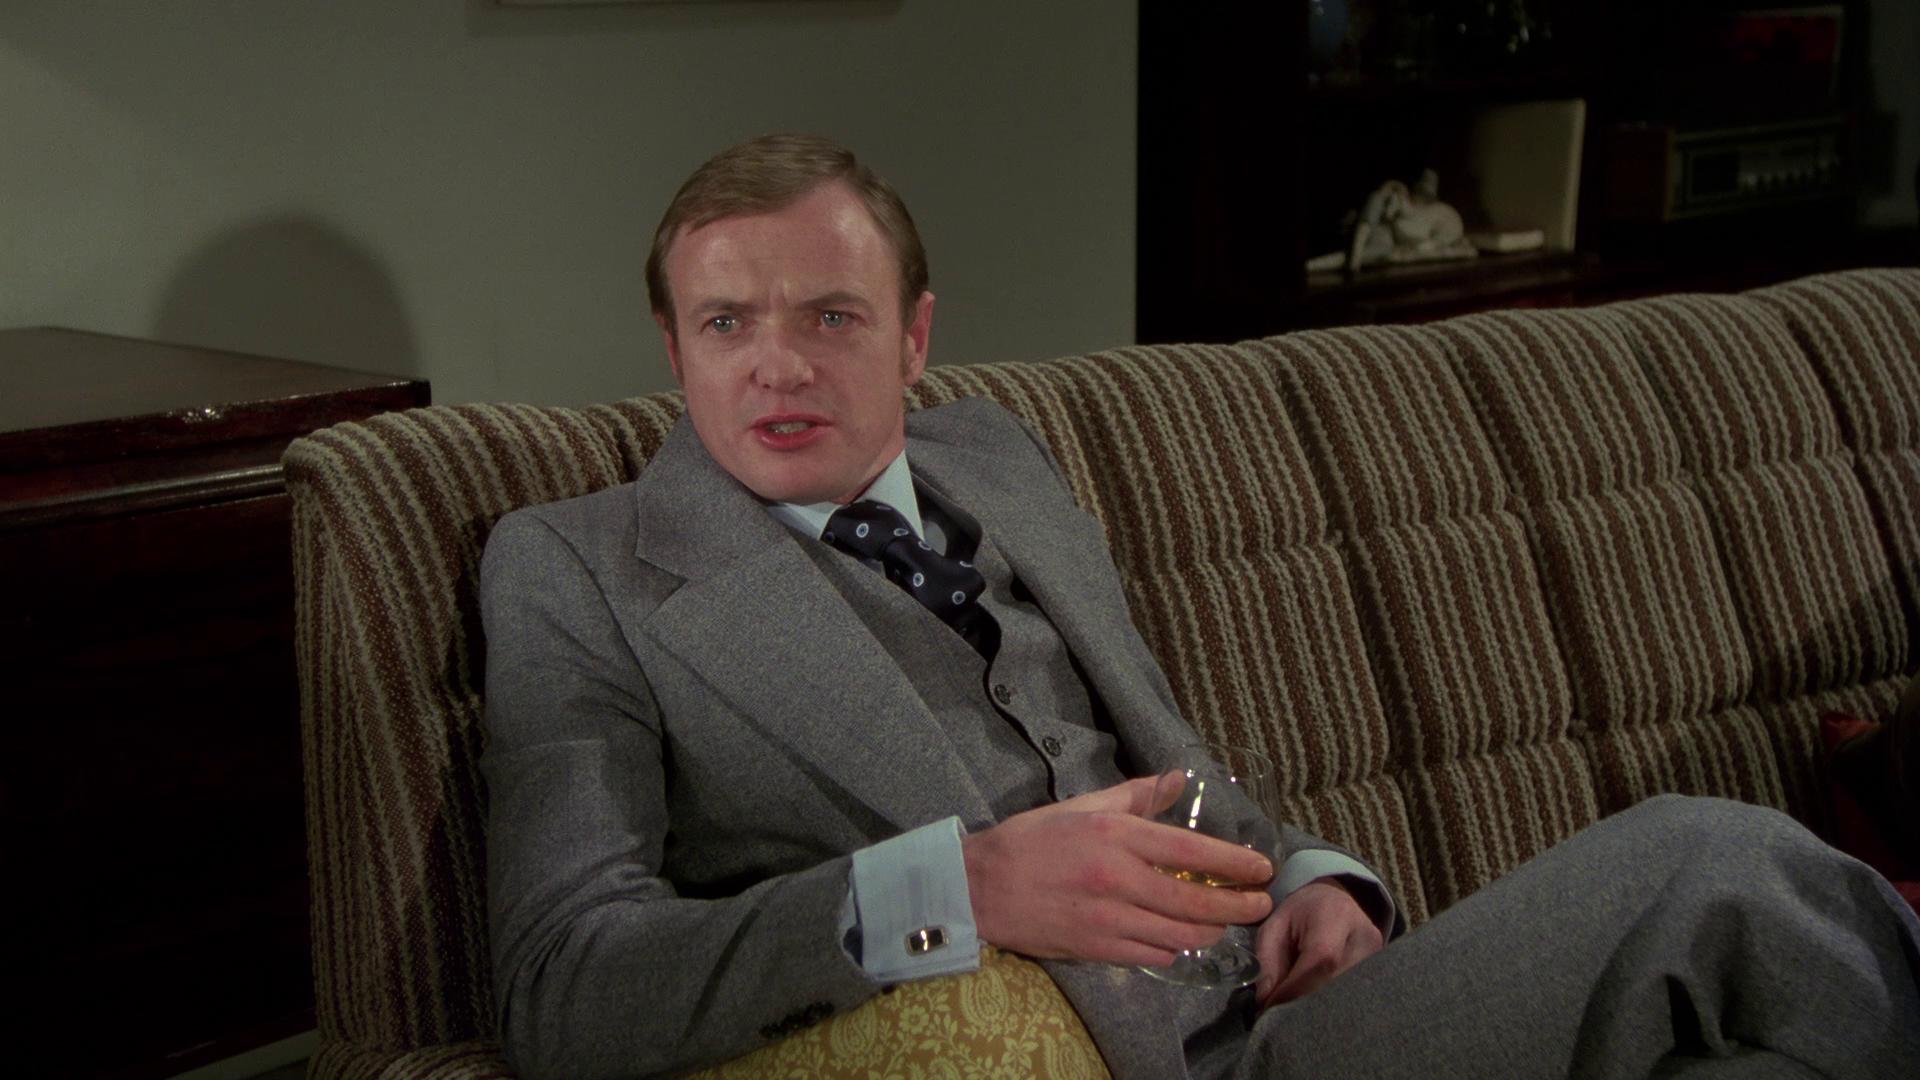 Happy Birthday to Likely Lad James Bolam!
He is 84 today! 